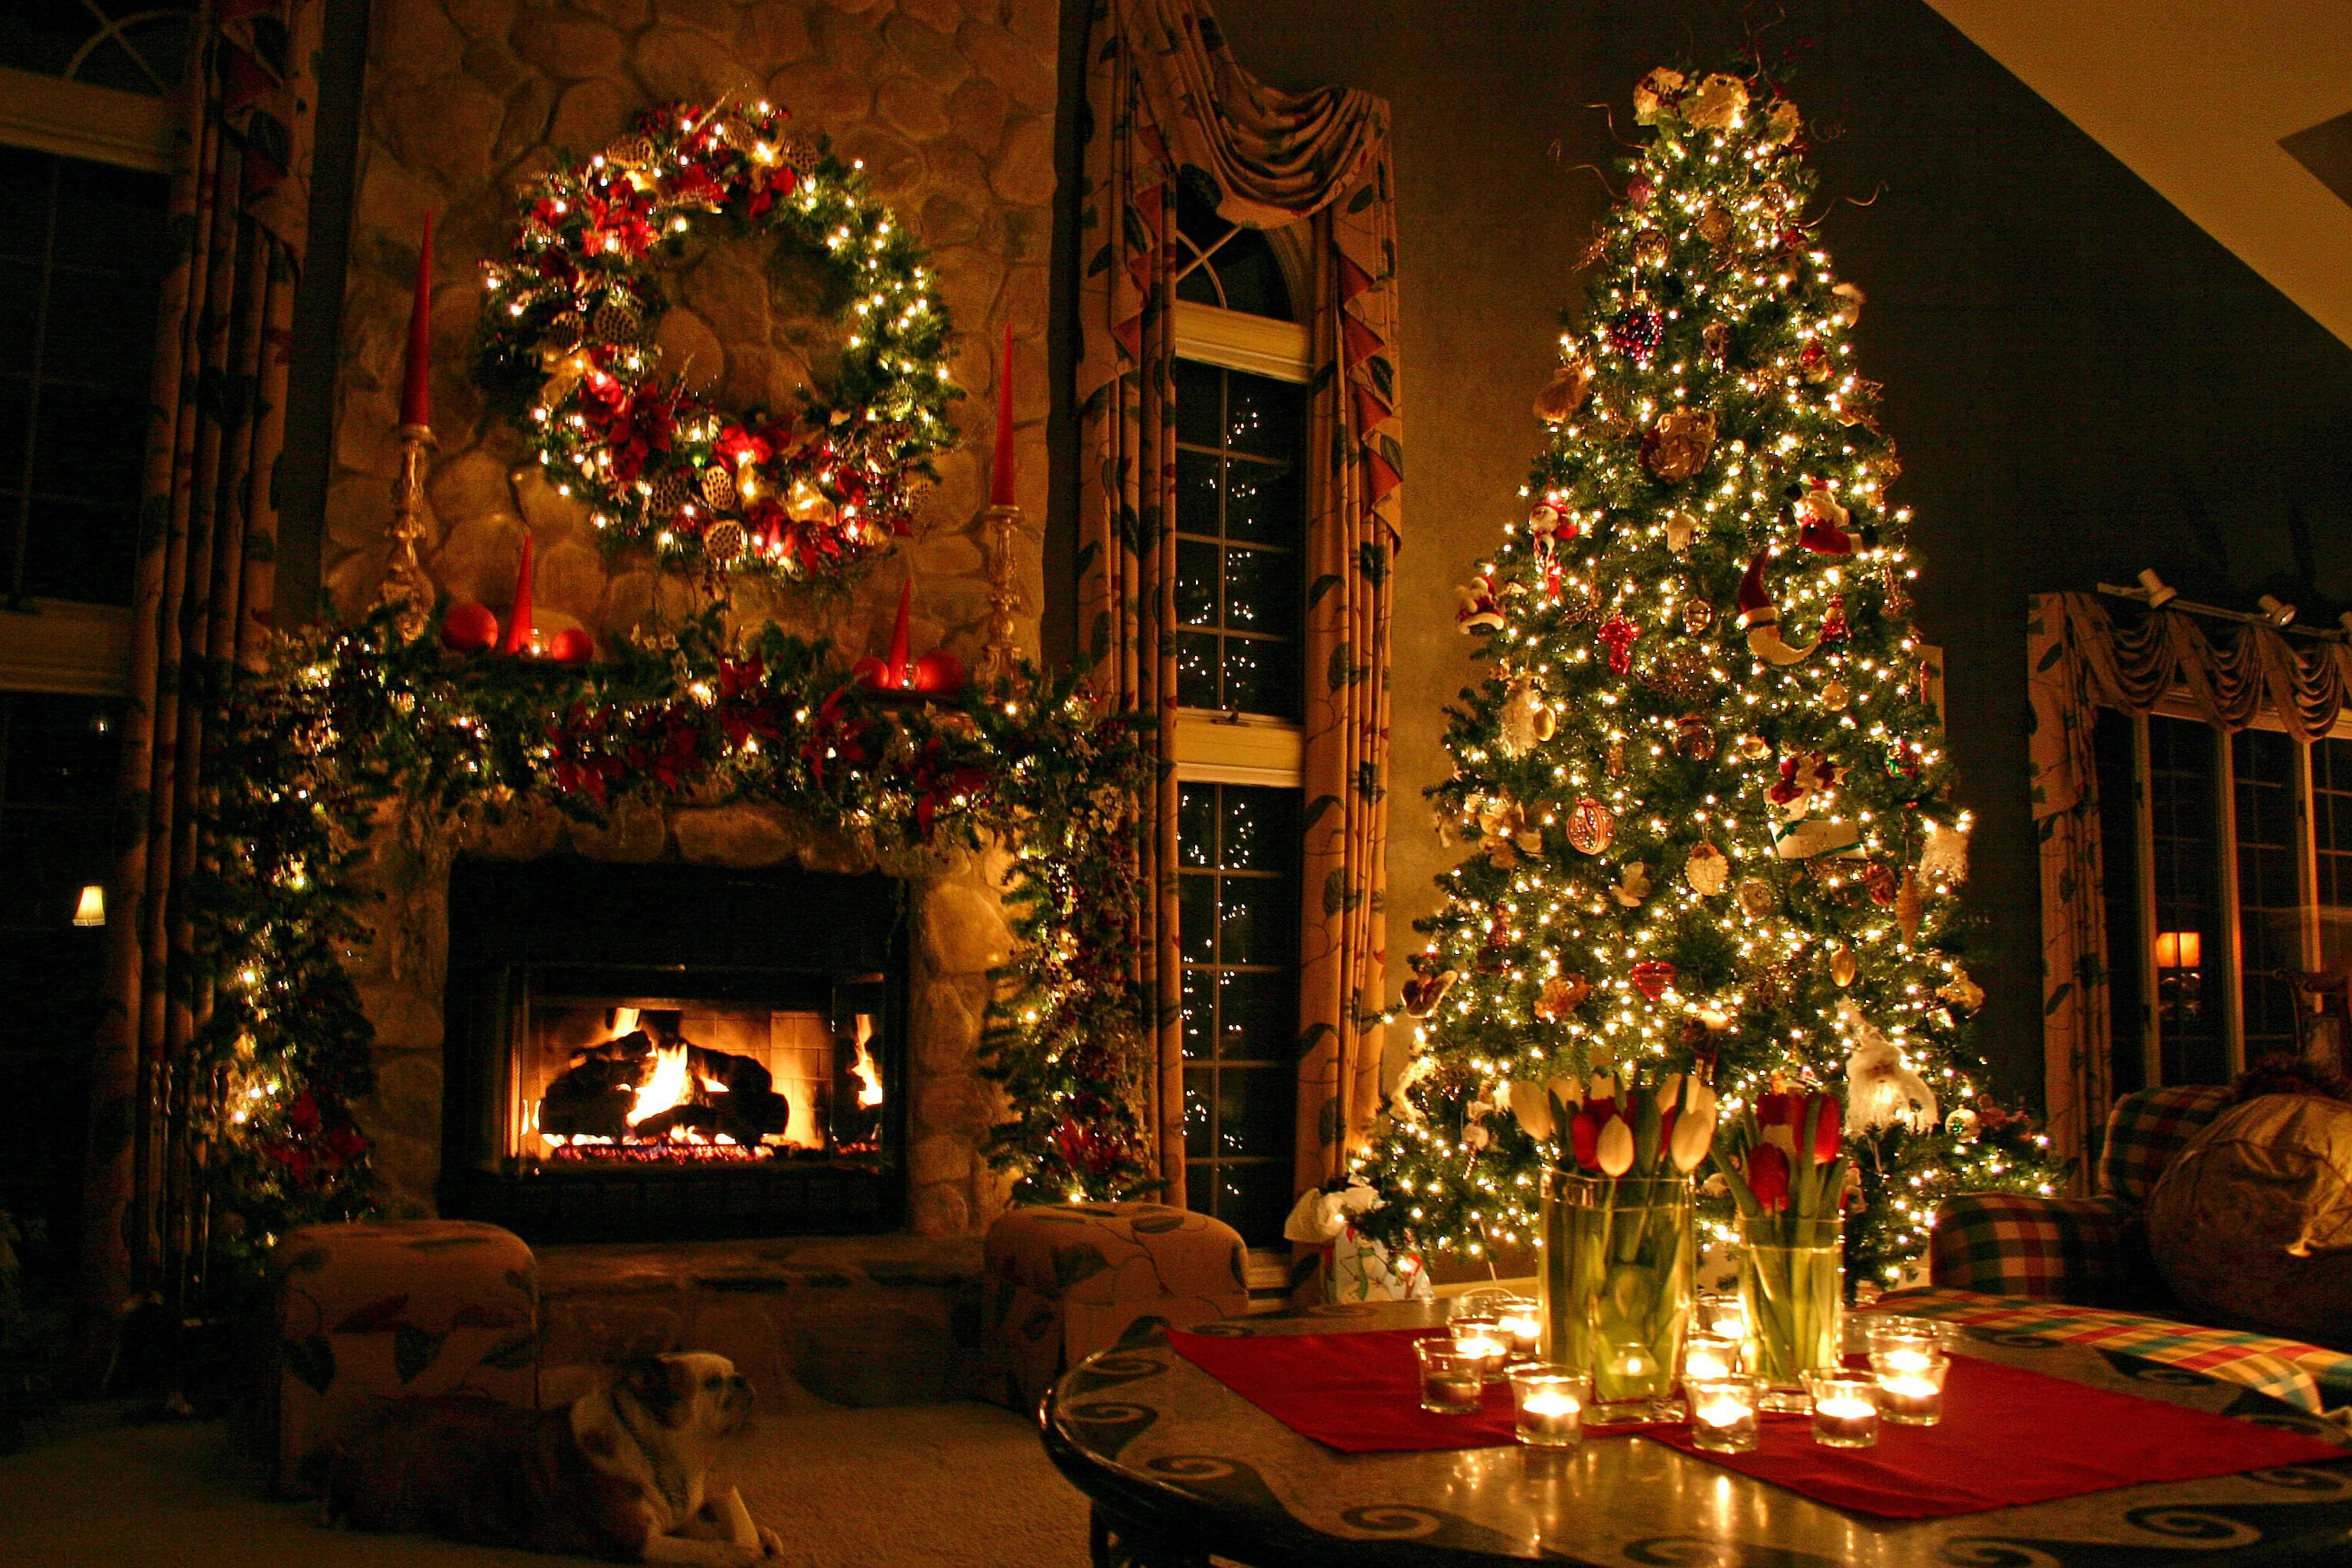 30 Ideas for Christmas Fireplace Scenes - Home Inspiration and Ideas ...